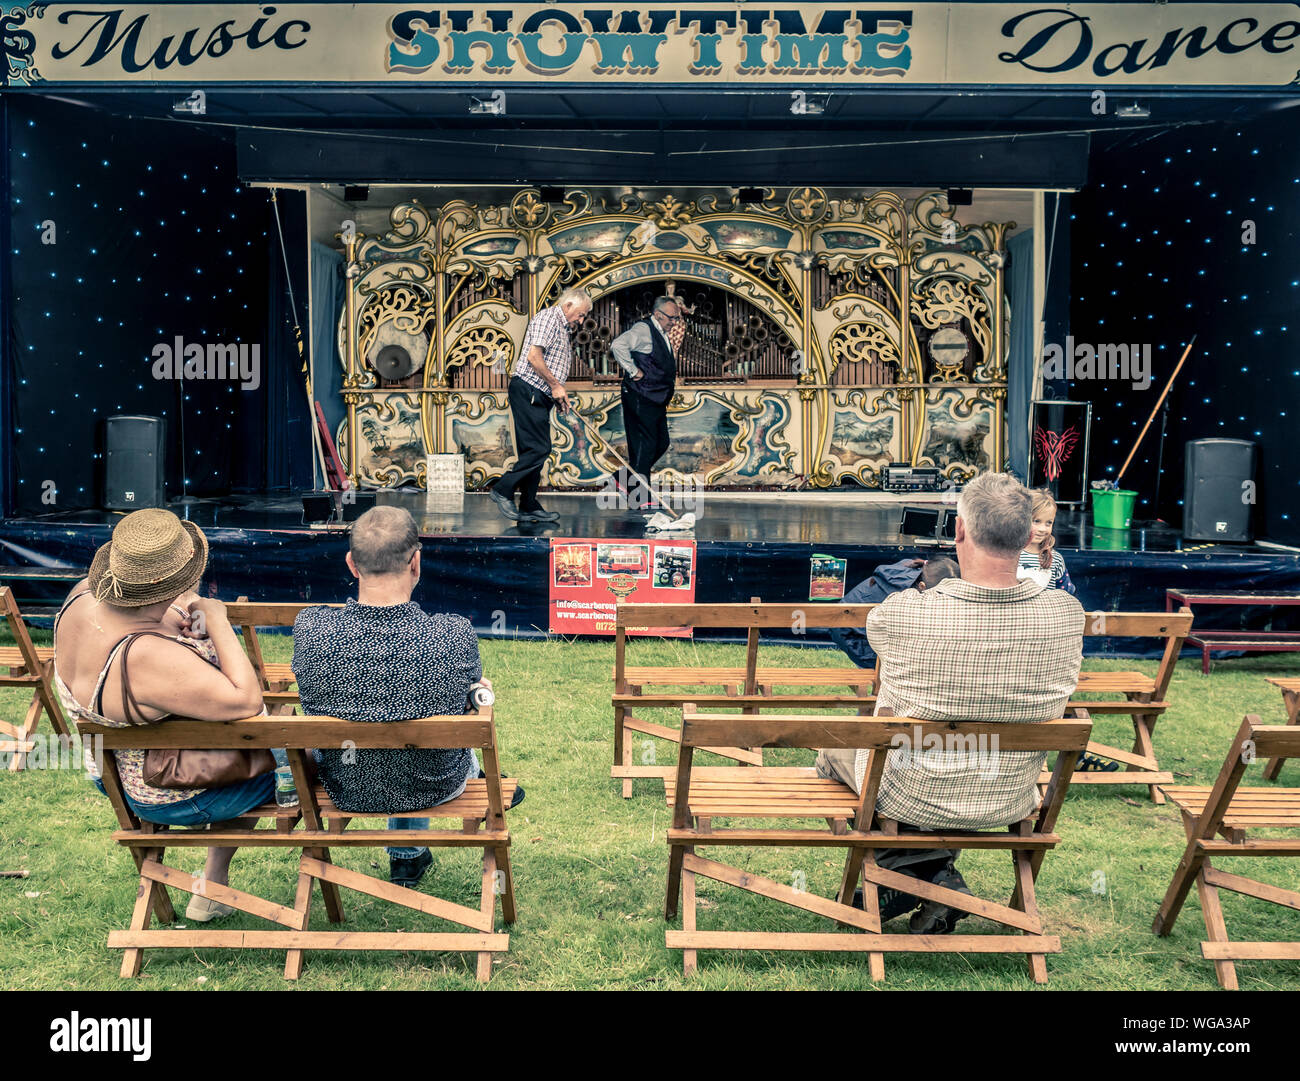 Audience watching stage in front of fairground steam organ being mopped between showers at outdoor show Stock Photo